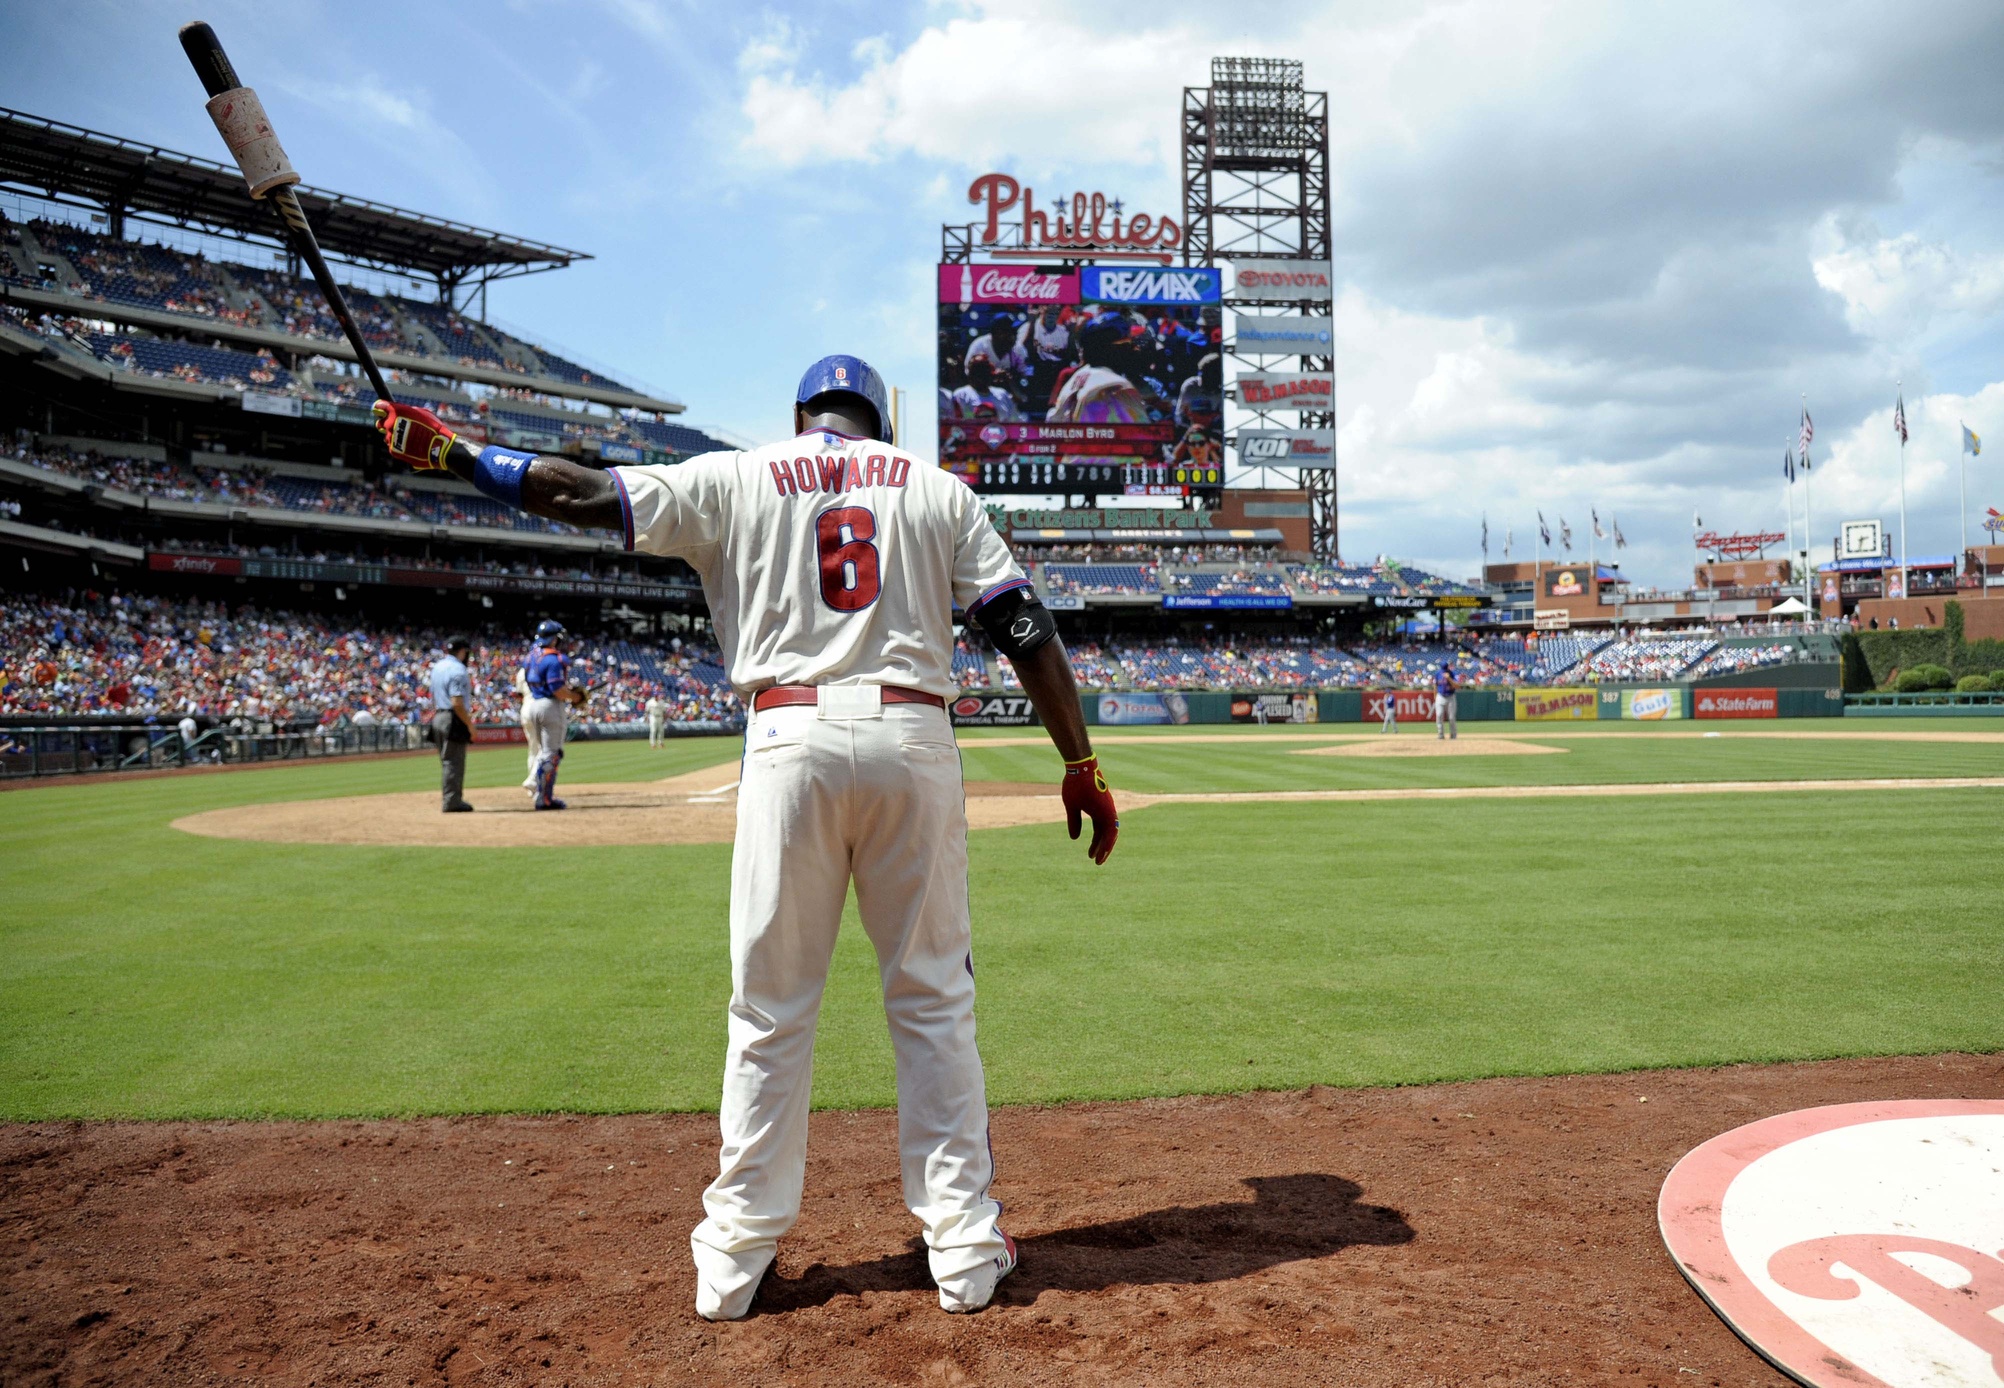 GET READY FOR RYAN HOWARD IN A PHILS' UNI IN 2015